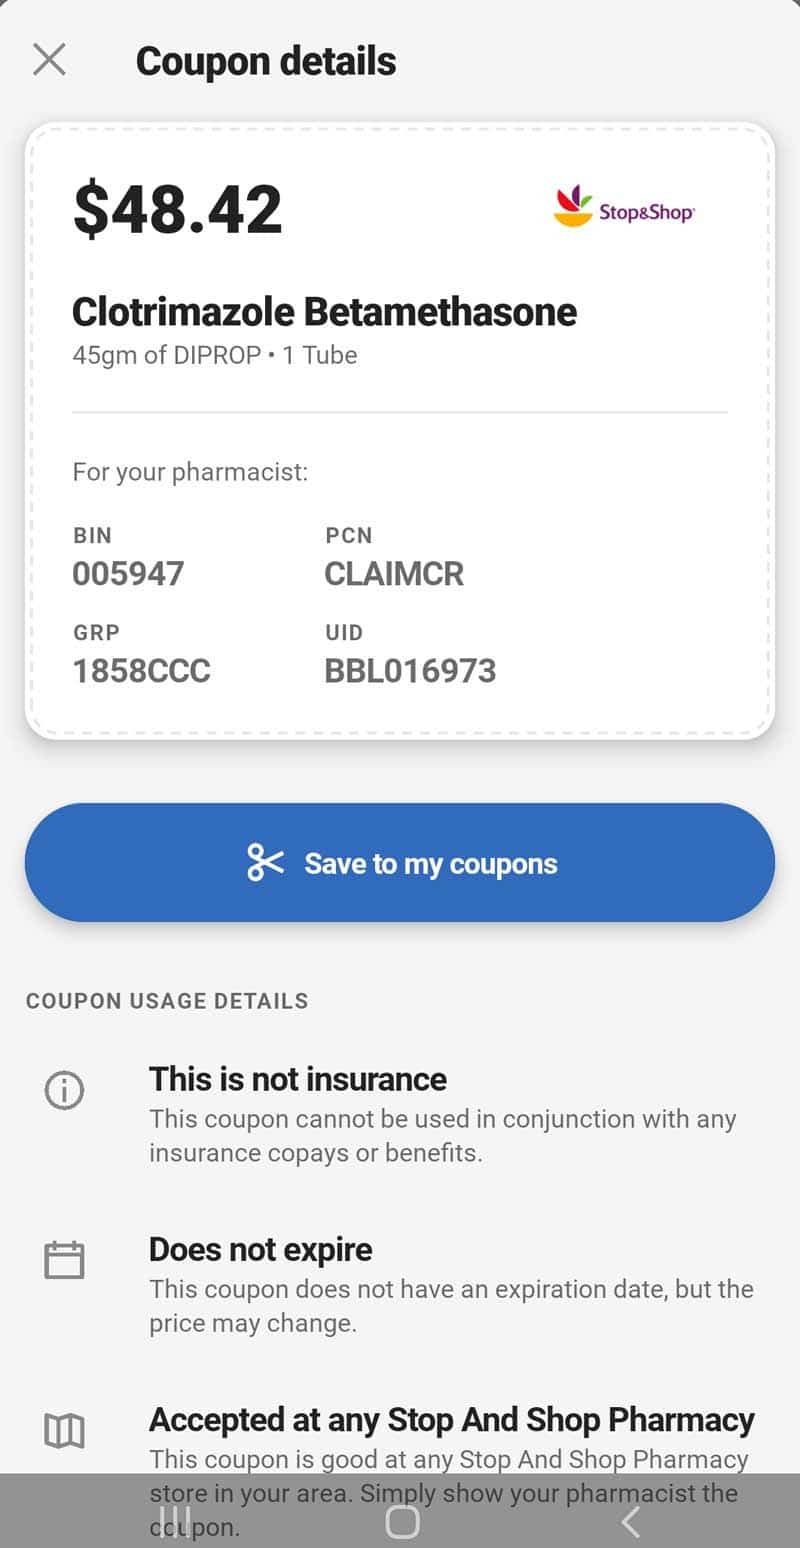 Clotrimazole and Betamethasone Dipropionate Cream savings card from optum savings card. This is just a screen cap of the card off the app.